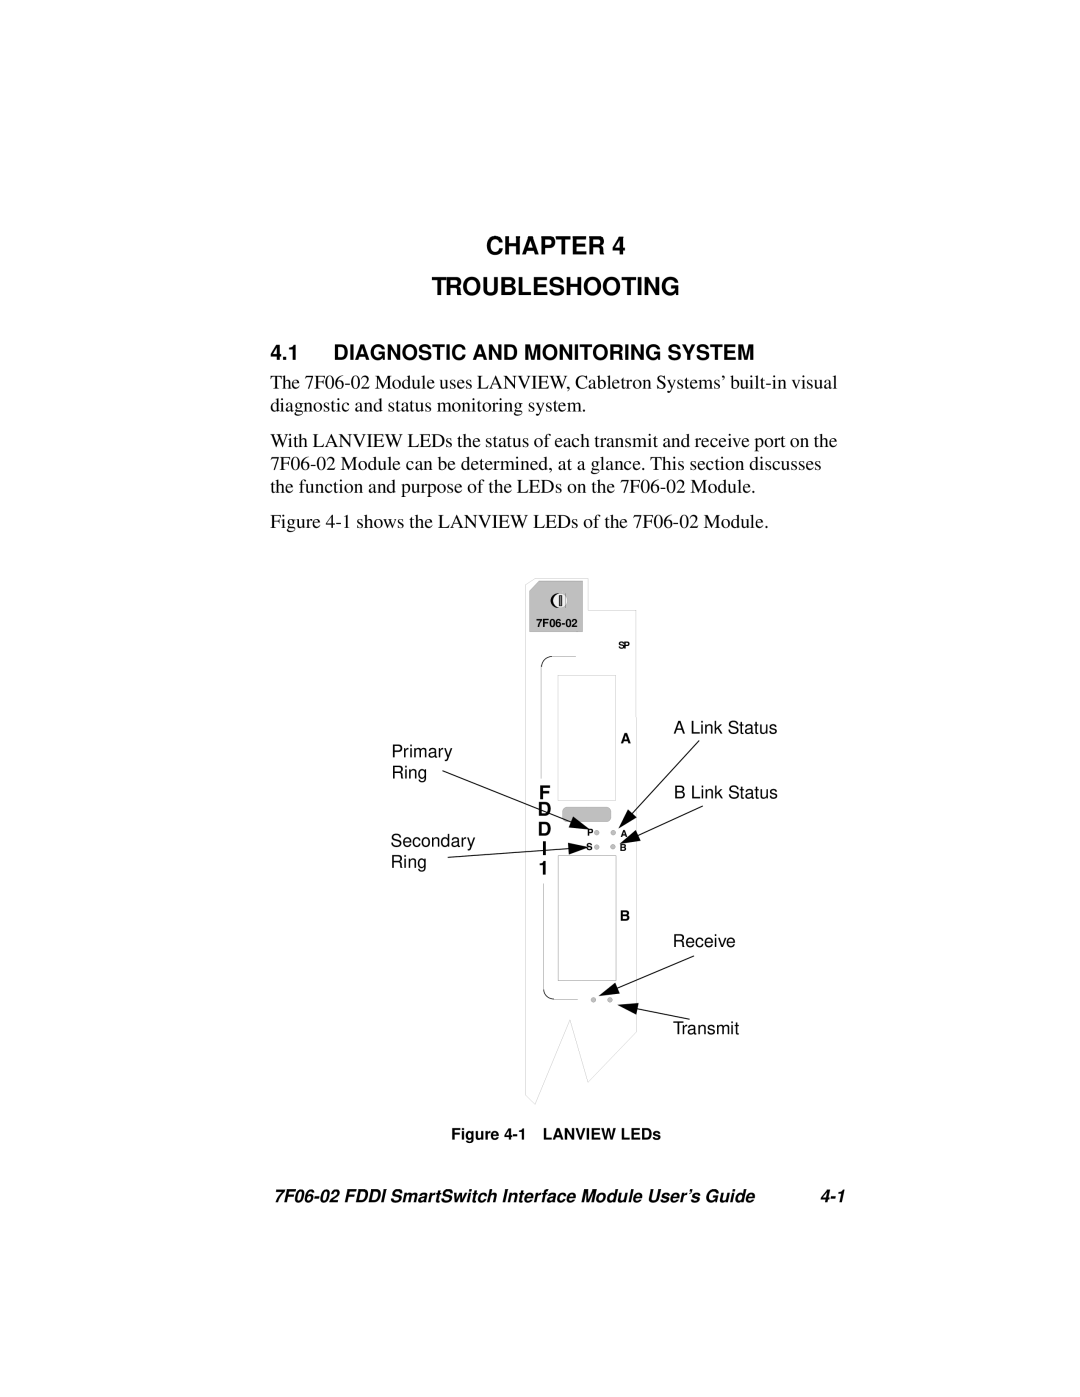 Cabletron Systems FDDI manual Chapter Troubleshooting, Diagnostic And Monitoring System, F D D 